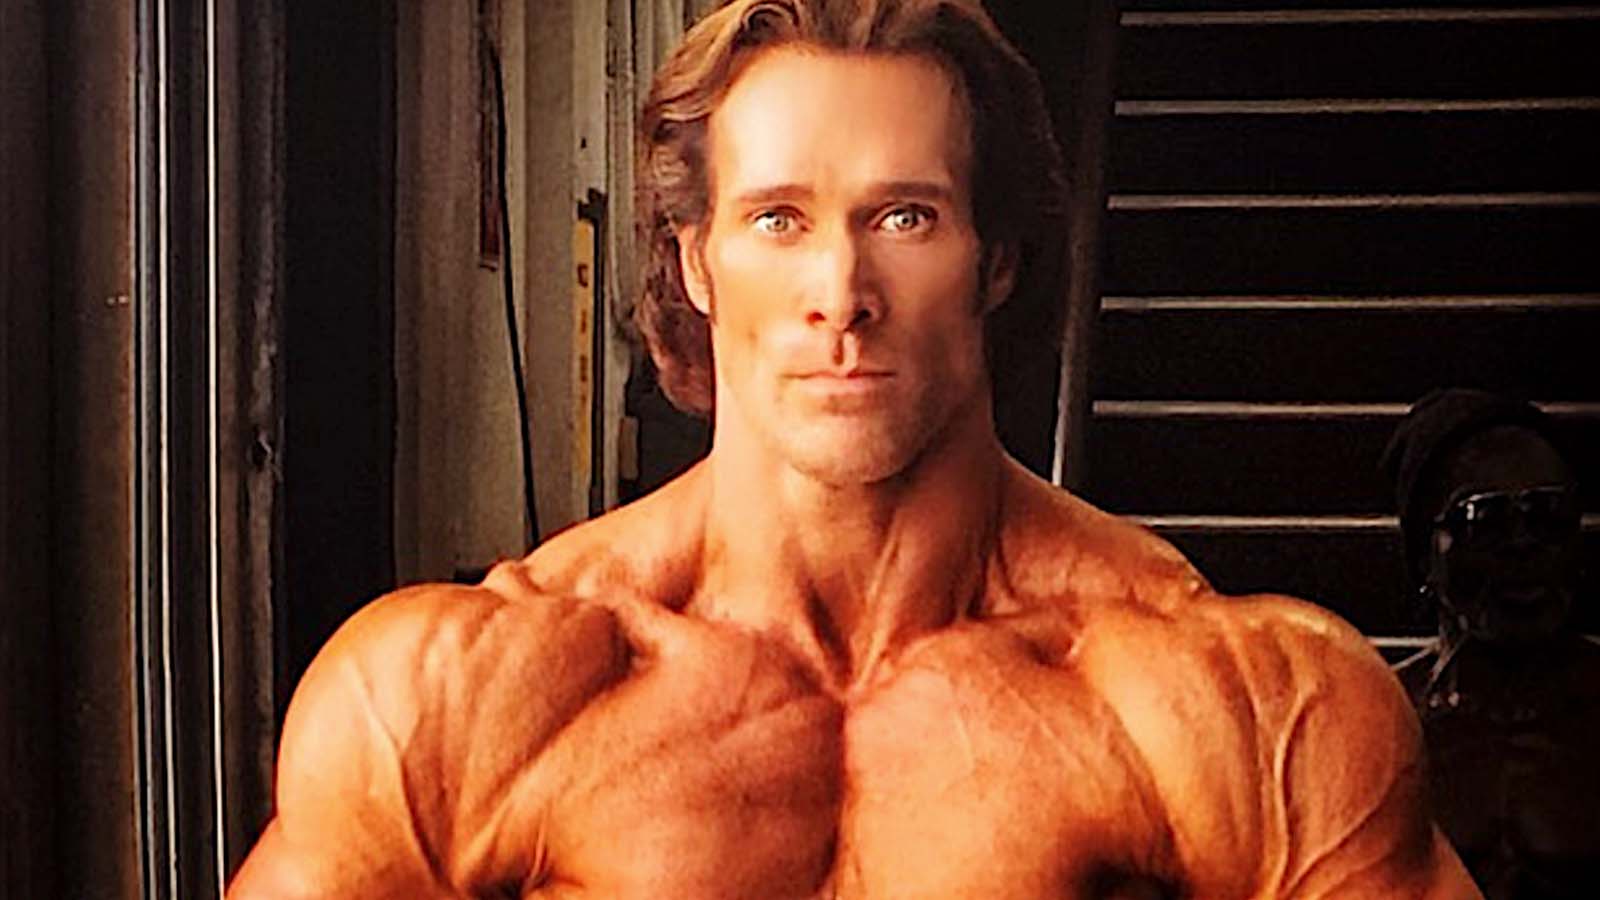 Mike O Hearn Success In Fitness Comes From Staying Consistent Not